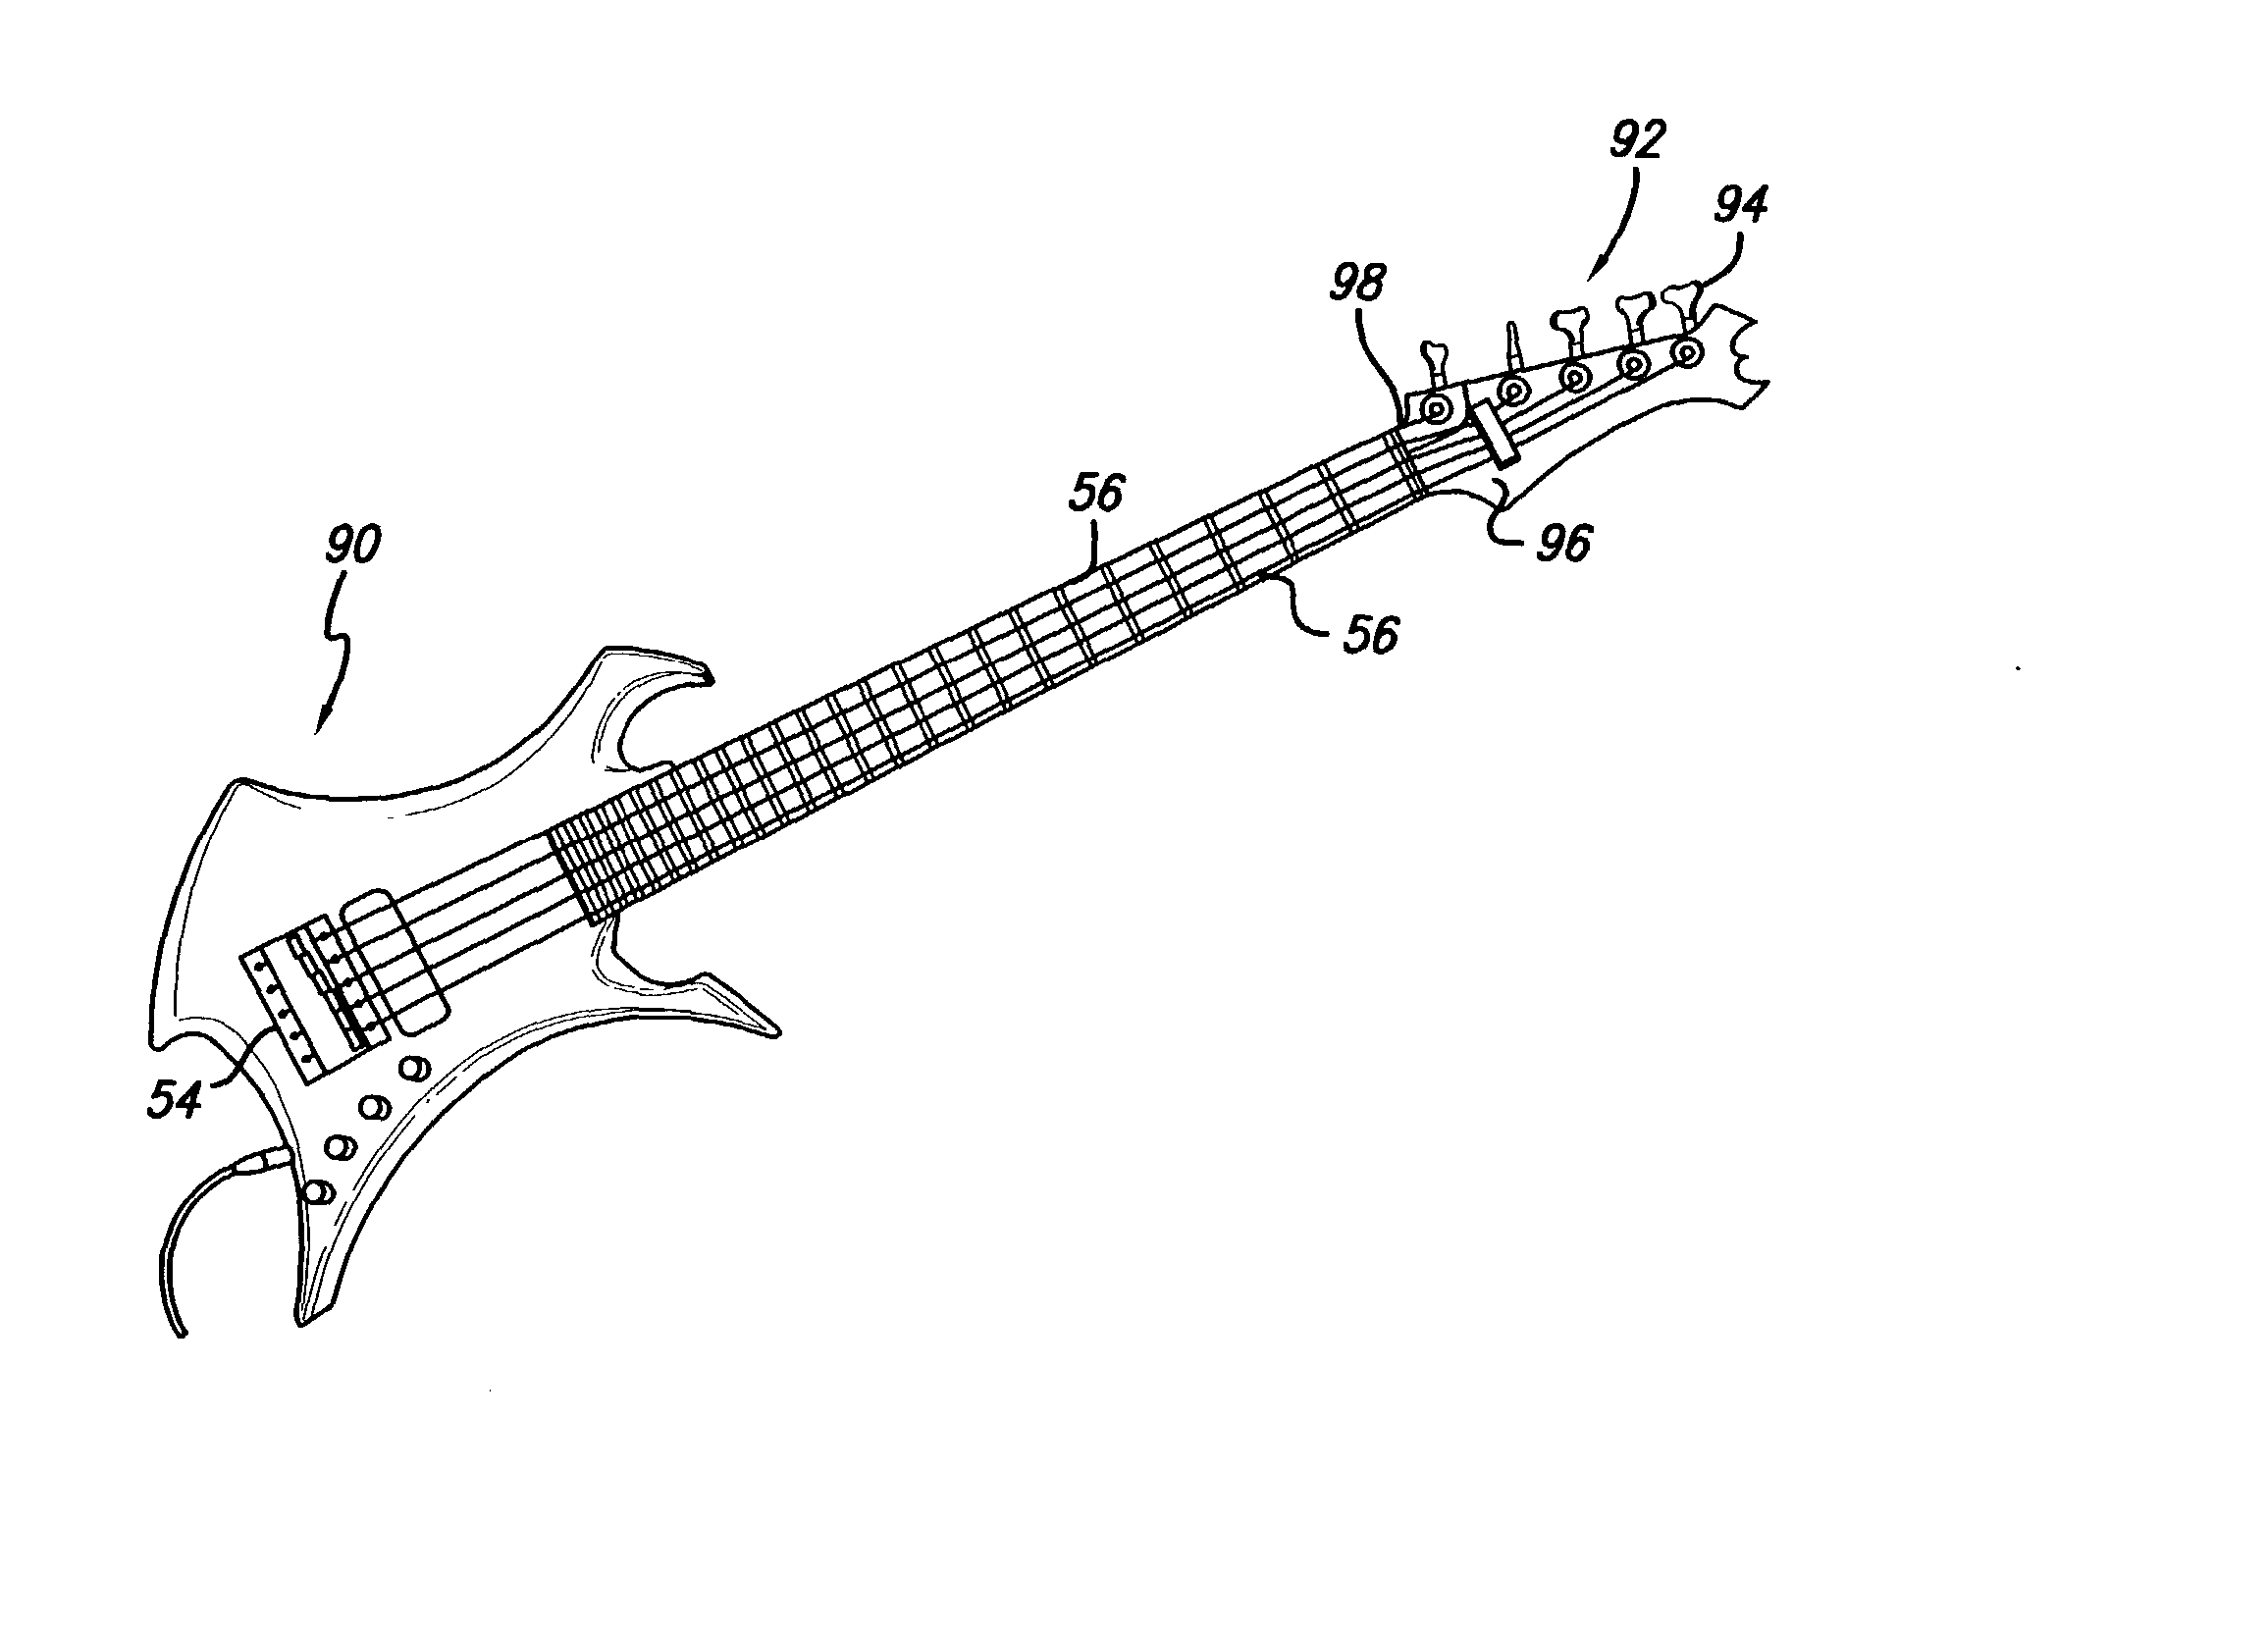 Stringed musical instruments and method therefor